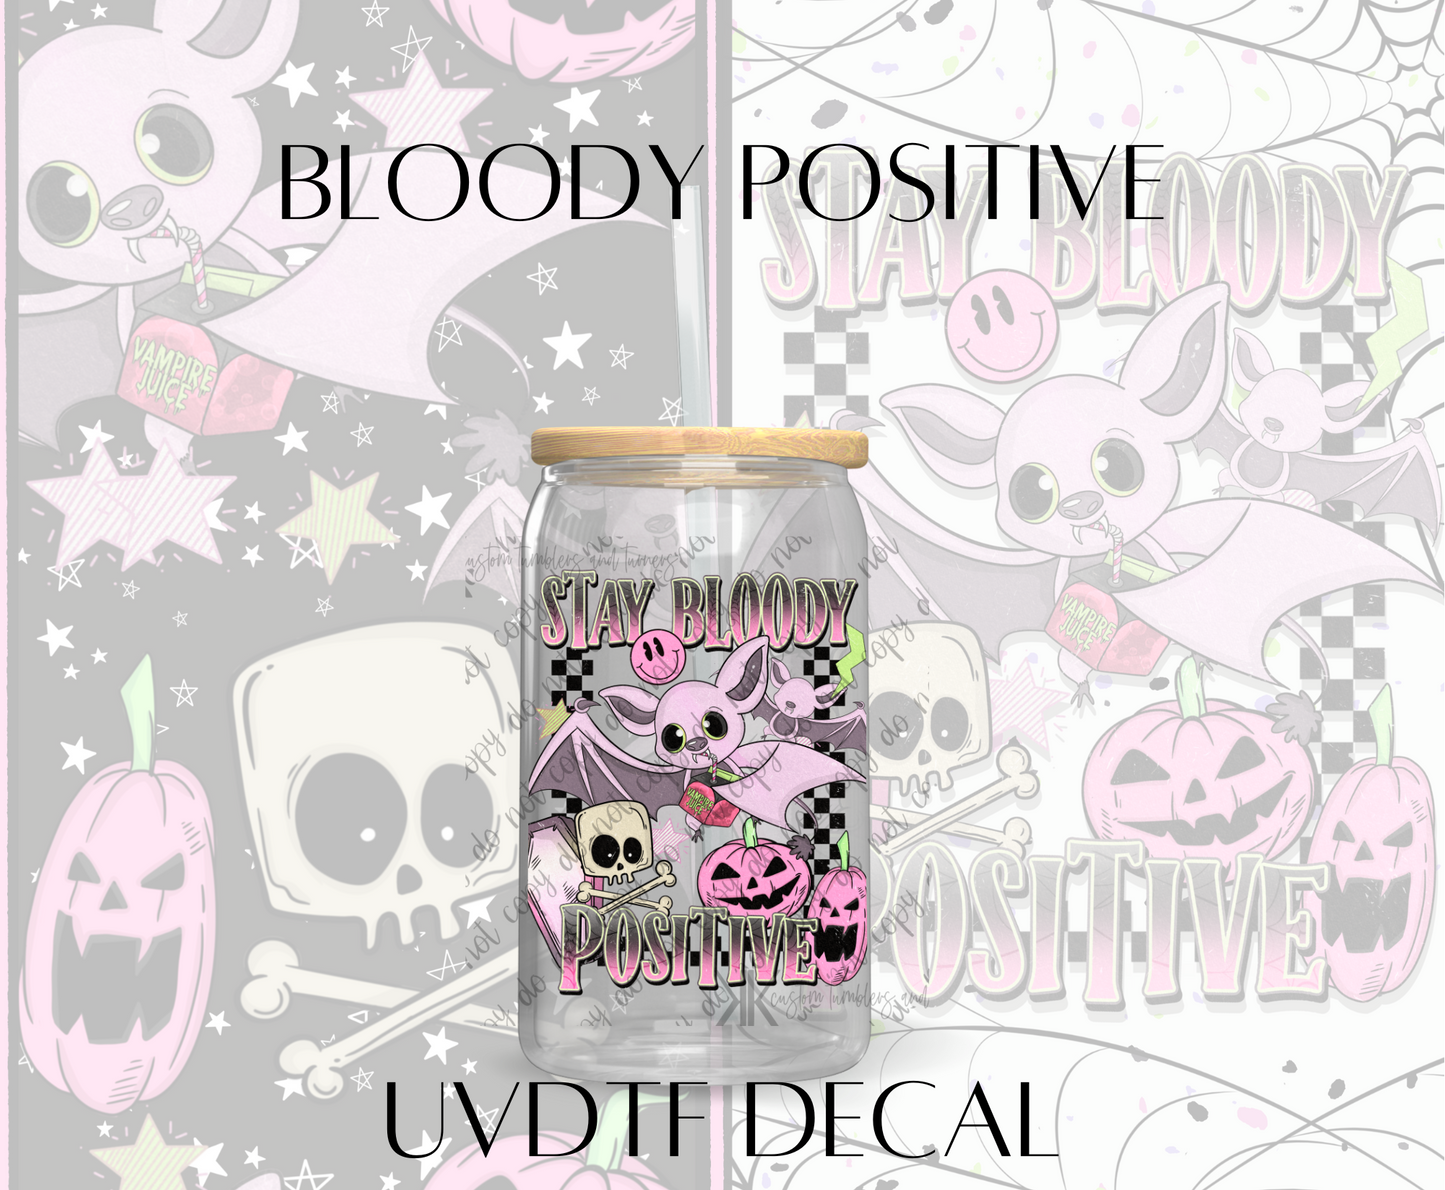 BLOODY POSITIVE UVDTF WRAP AND/OR DECAL